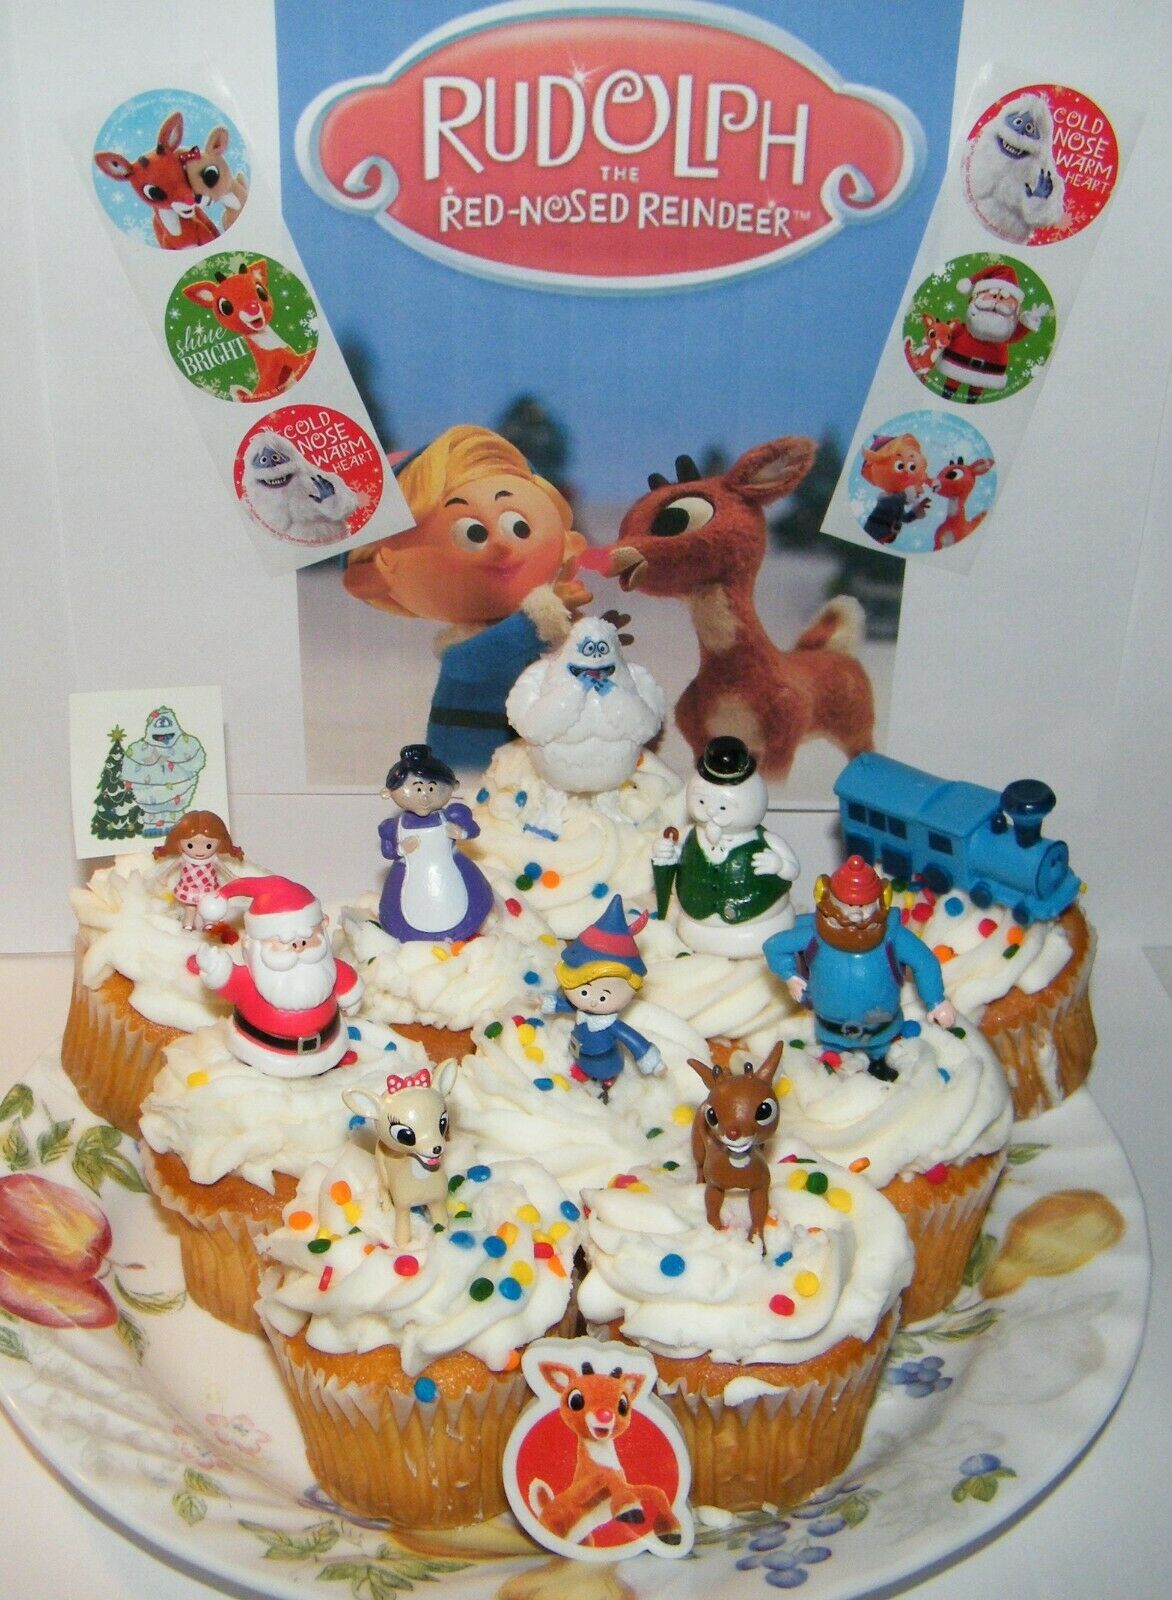 Rudolph The Red Nosed Reindeer Cake Toppers Set Of 10 Figures With Stickers More